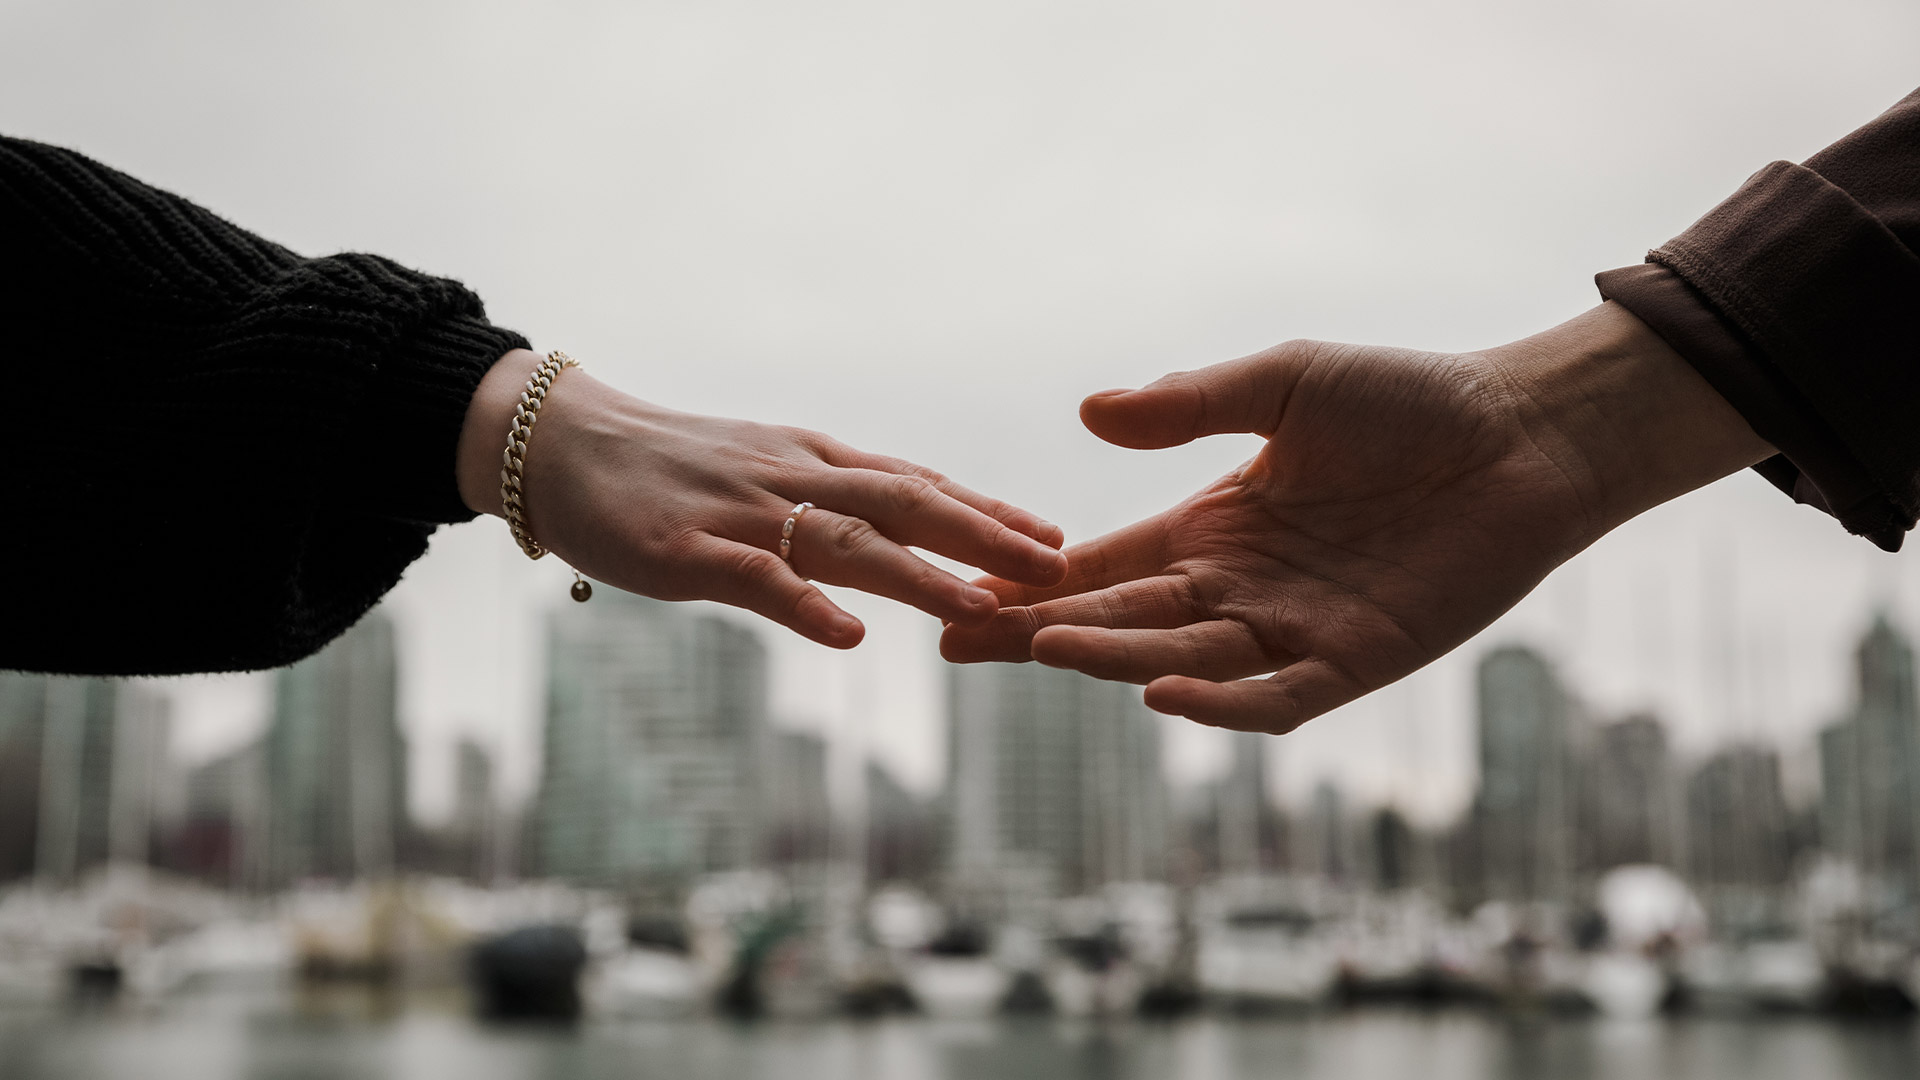 Two hands reaching together with a skyline in the background